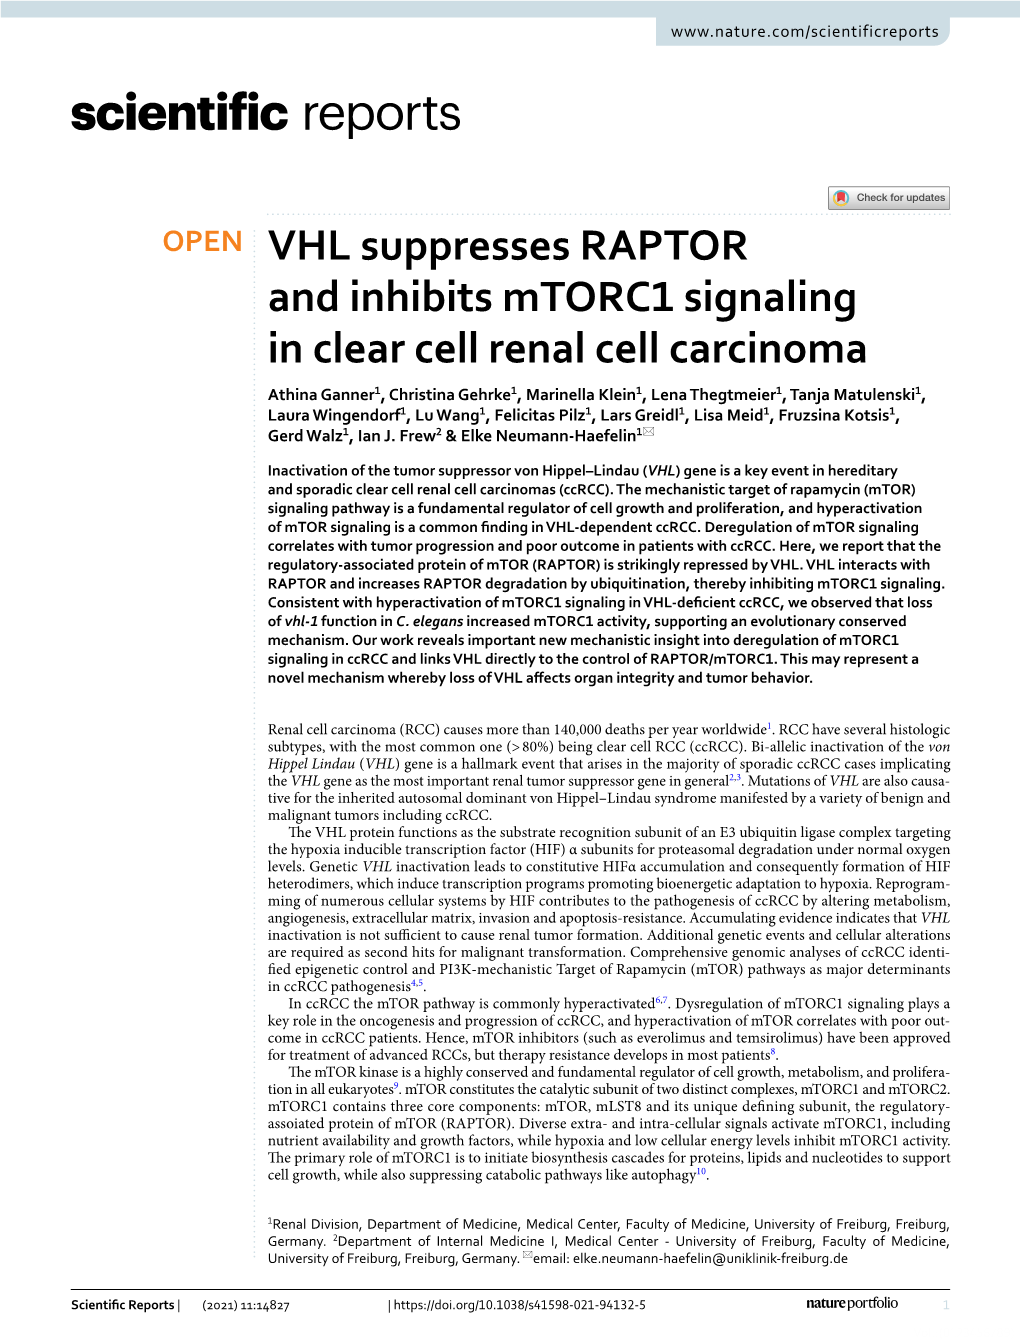 VHL Suppresses RAPTOR and Inhibits Mtorc1 Signaling in Clear Cell